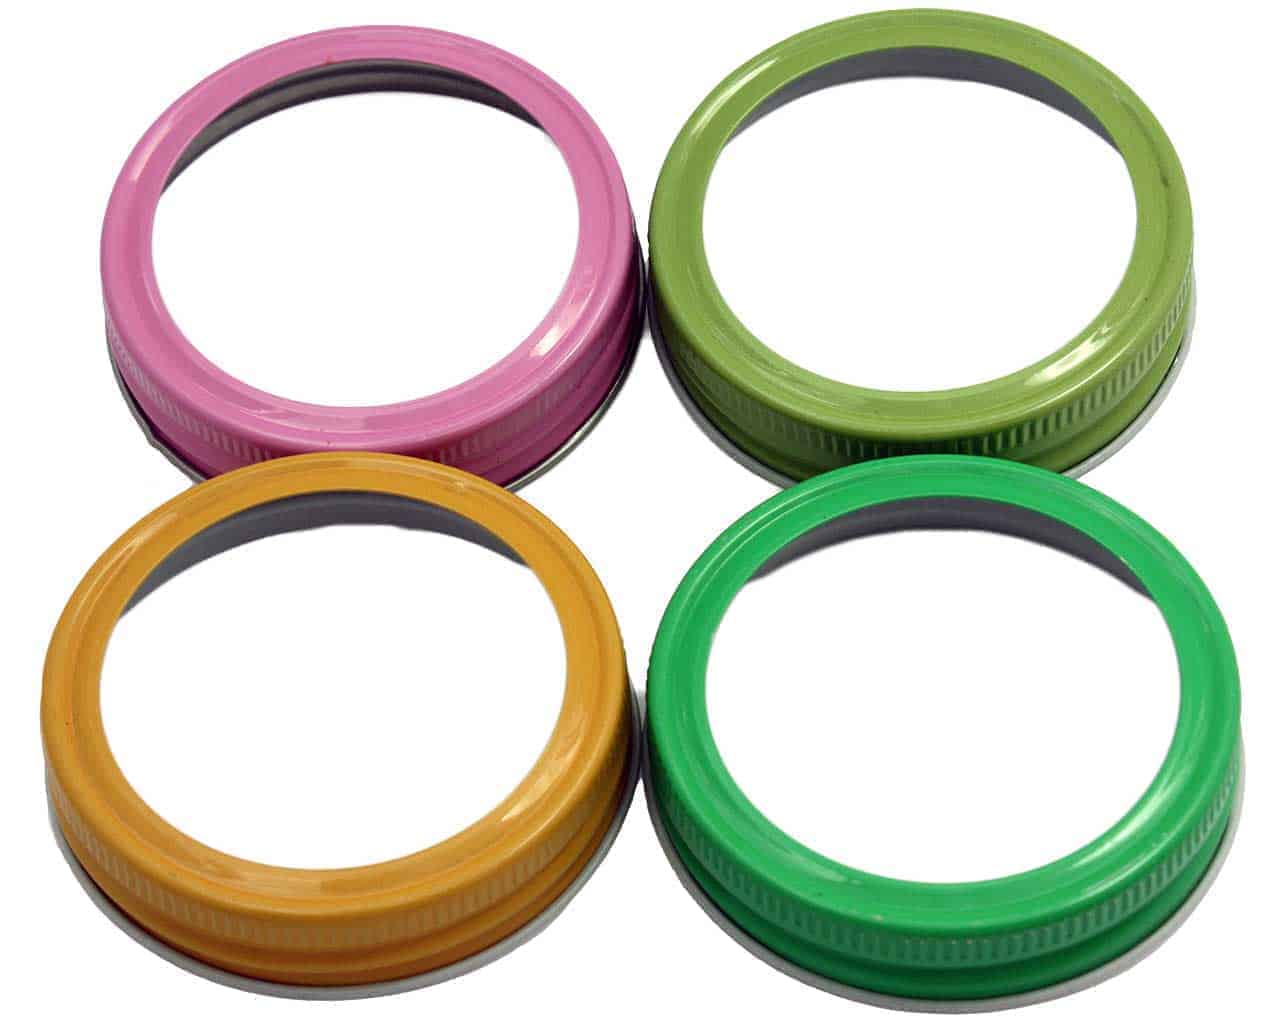 Pink, green, and yellow painted bands / rings for regular mouth Mason jars